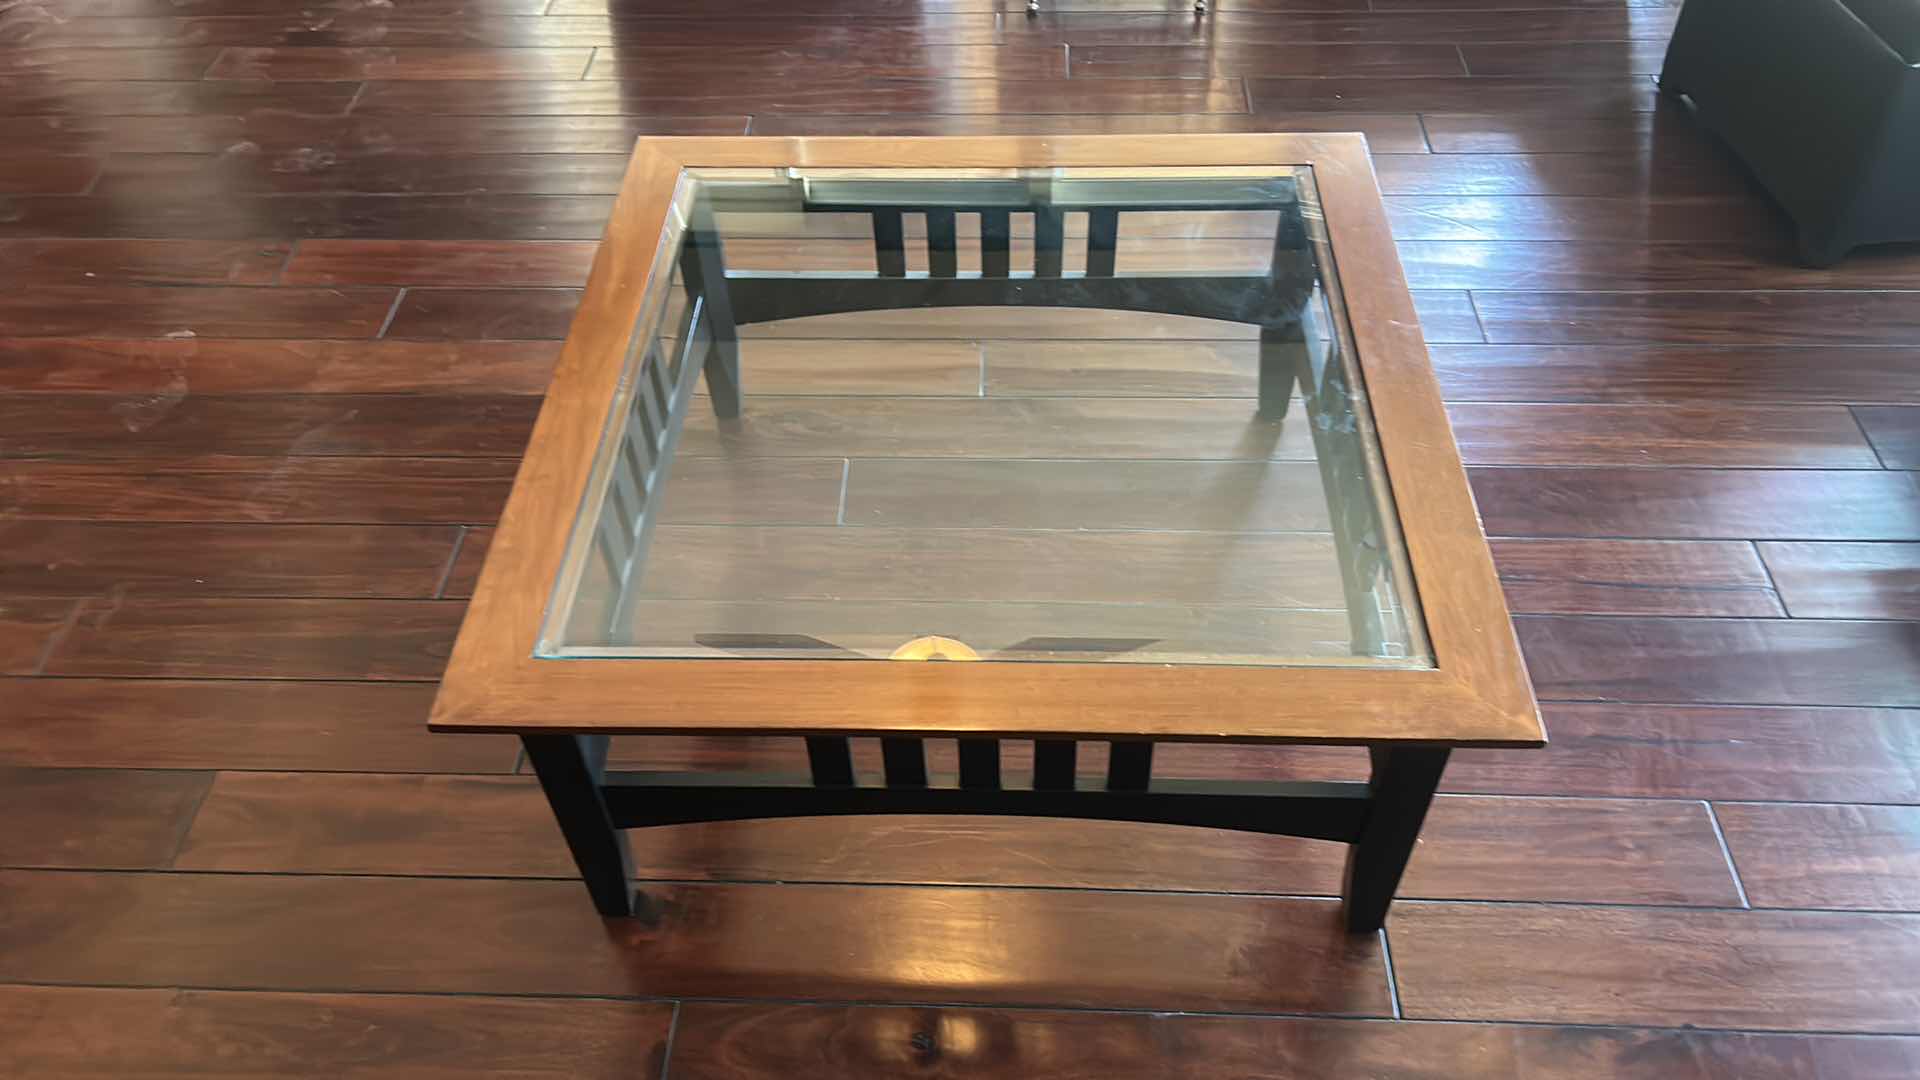 Photo 2 of SQUARE COFFEE TABLE WITH GLASS INSERT 38” x 38” x 17”